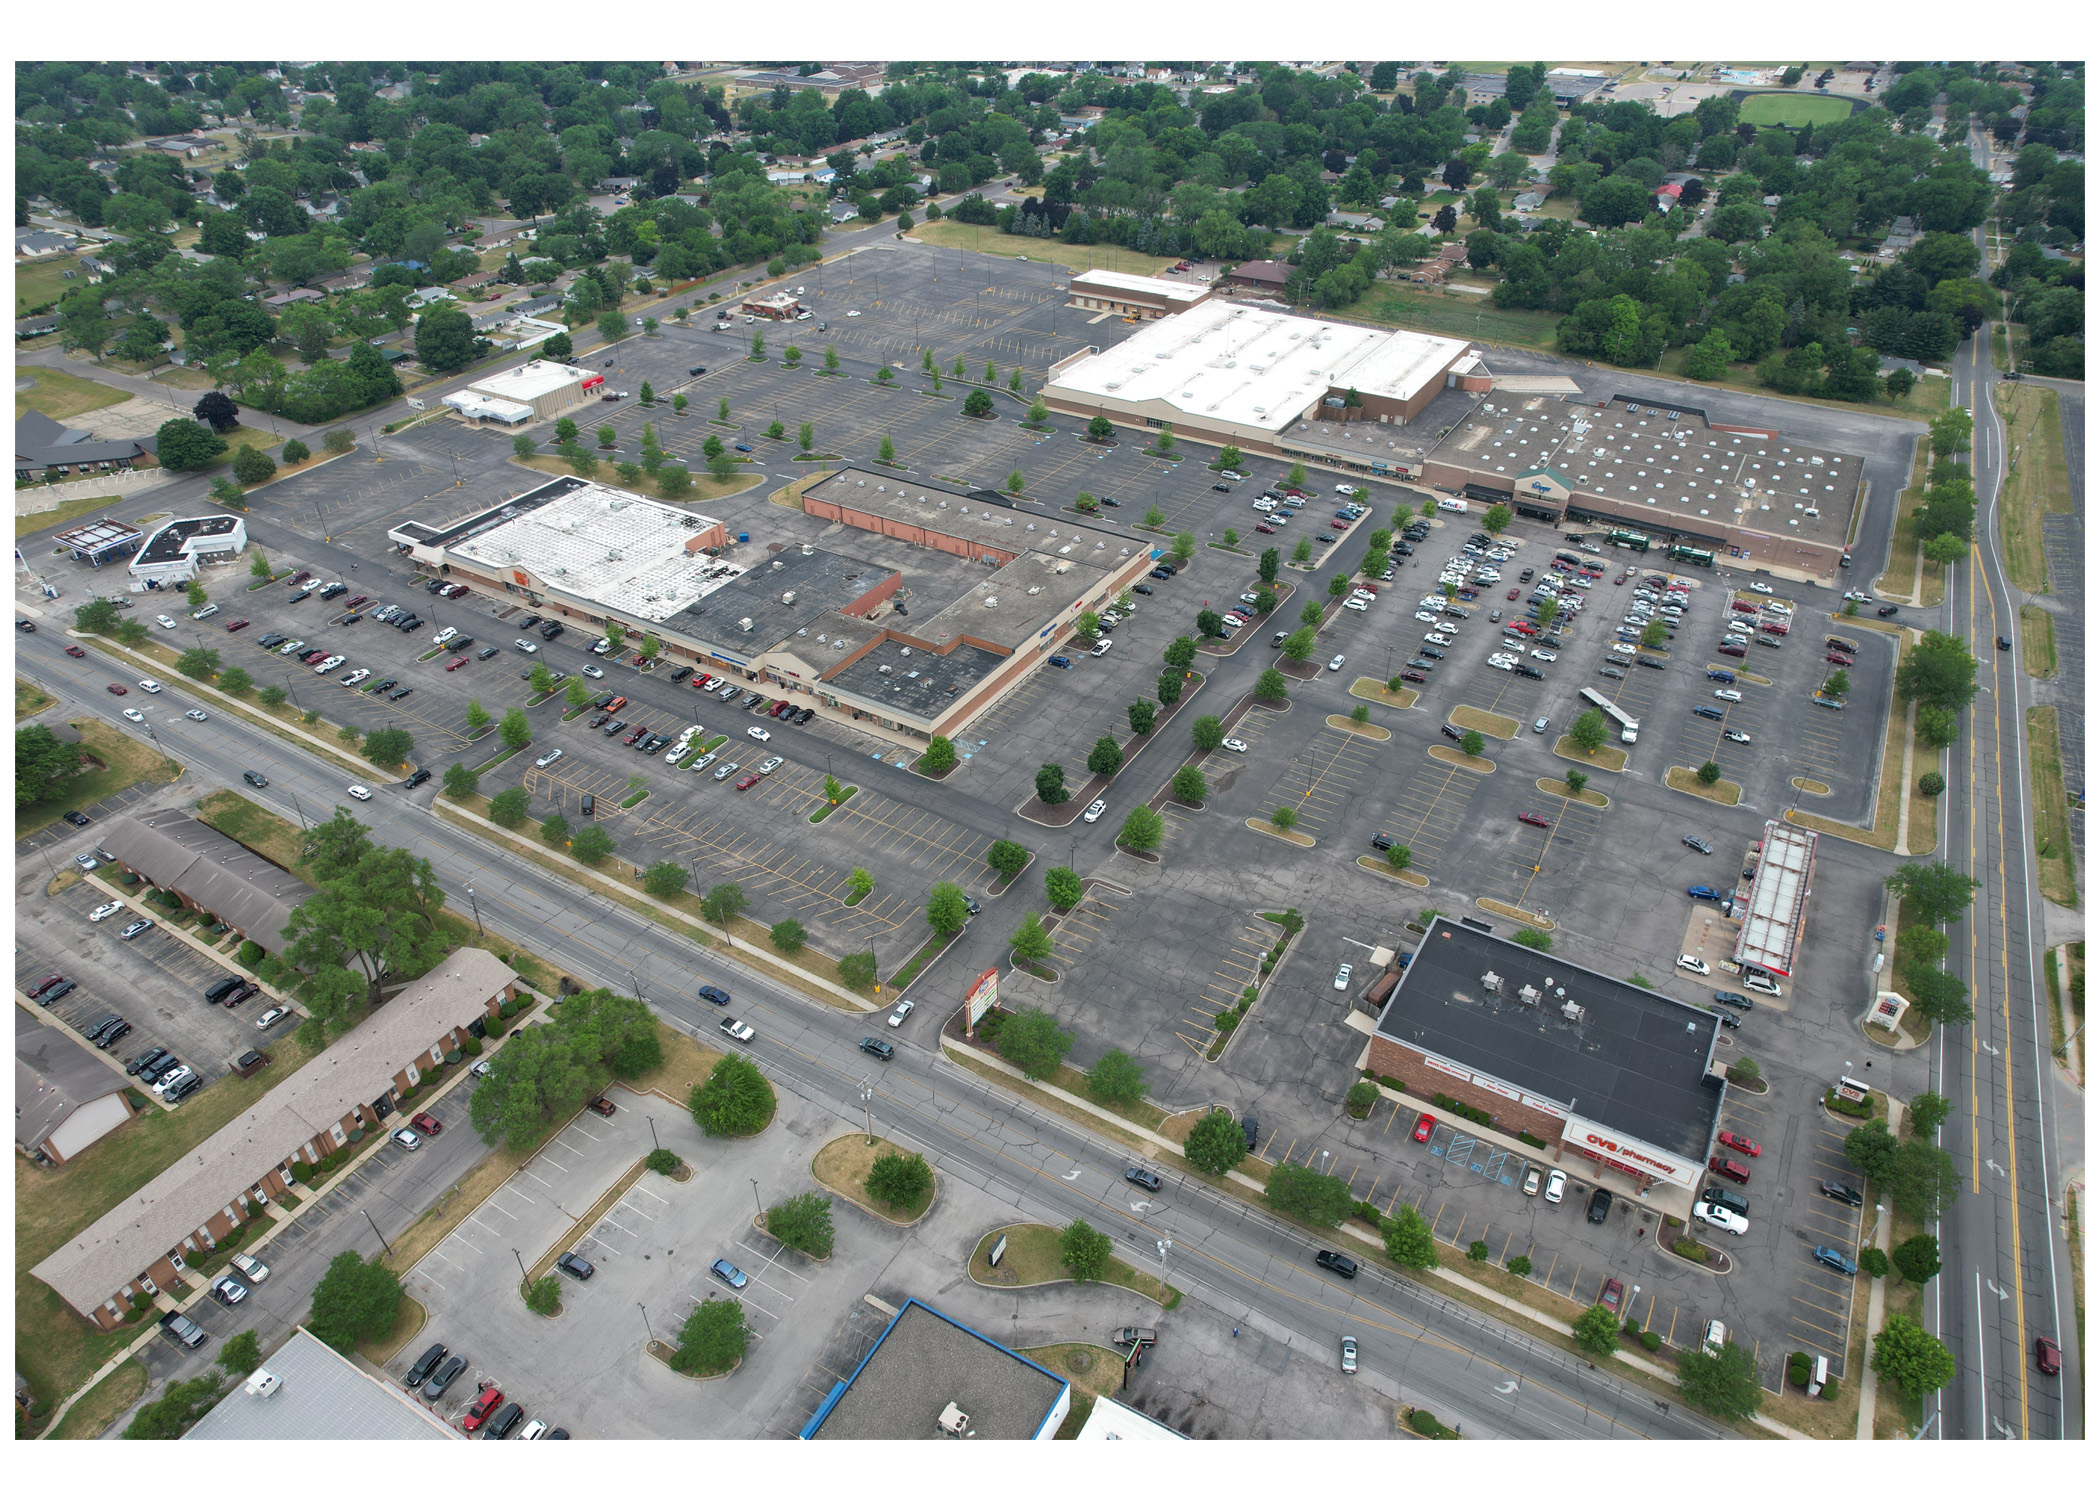 Woodland Crossing, aerial view of entire shopping center and parking lot.